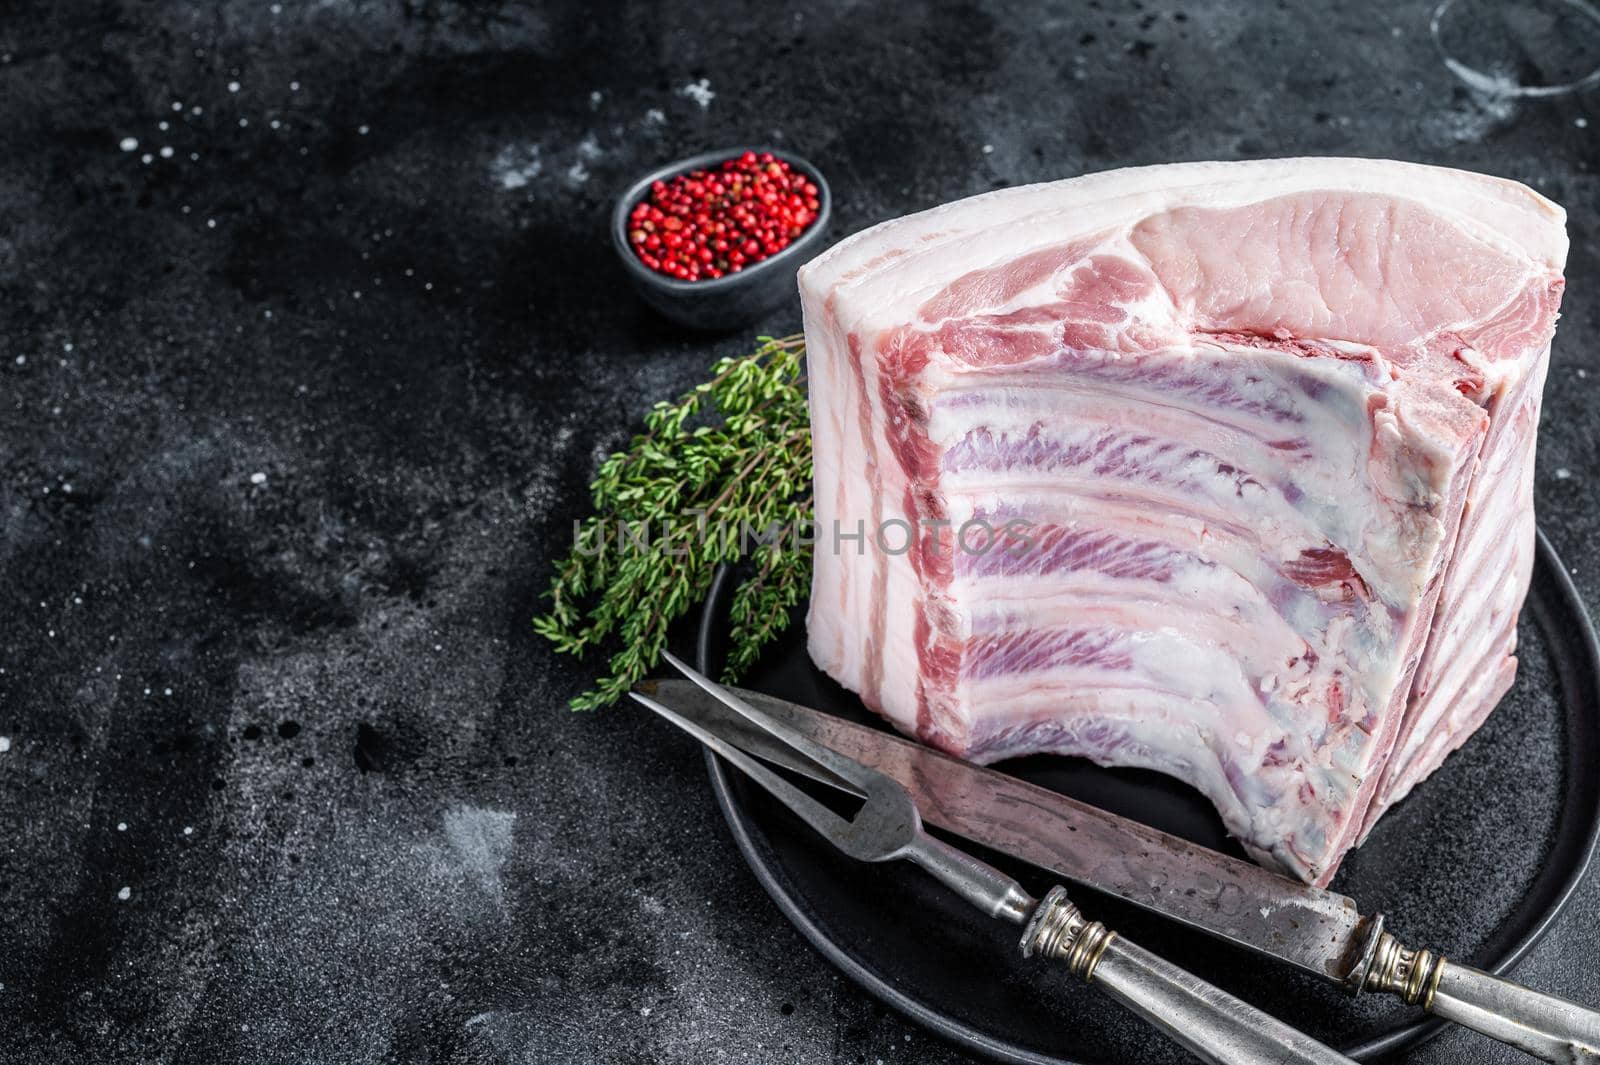 Fresh Raw whole rack of pork loin chops with ribs on a plate with meat fork. Black background. Top view. Copy space.